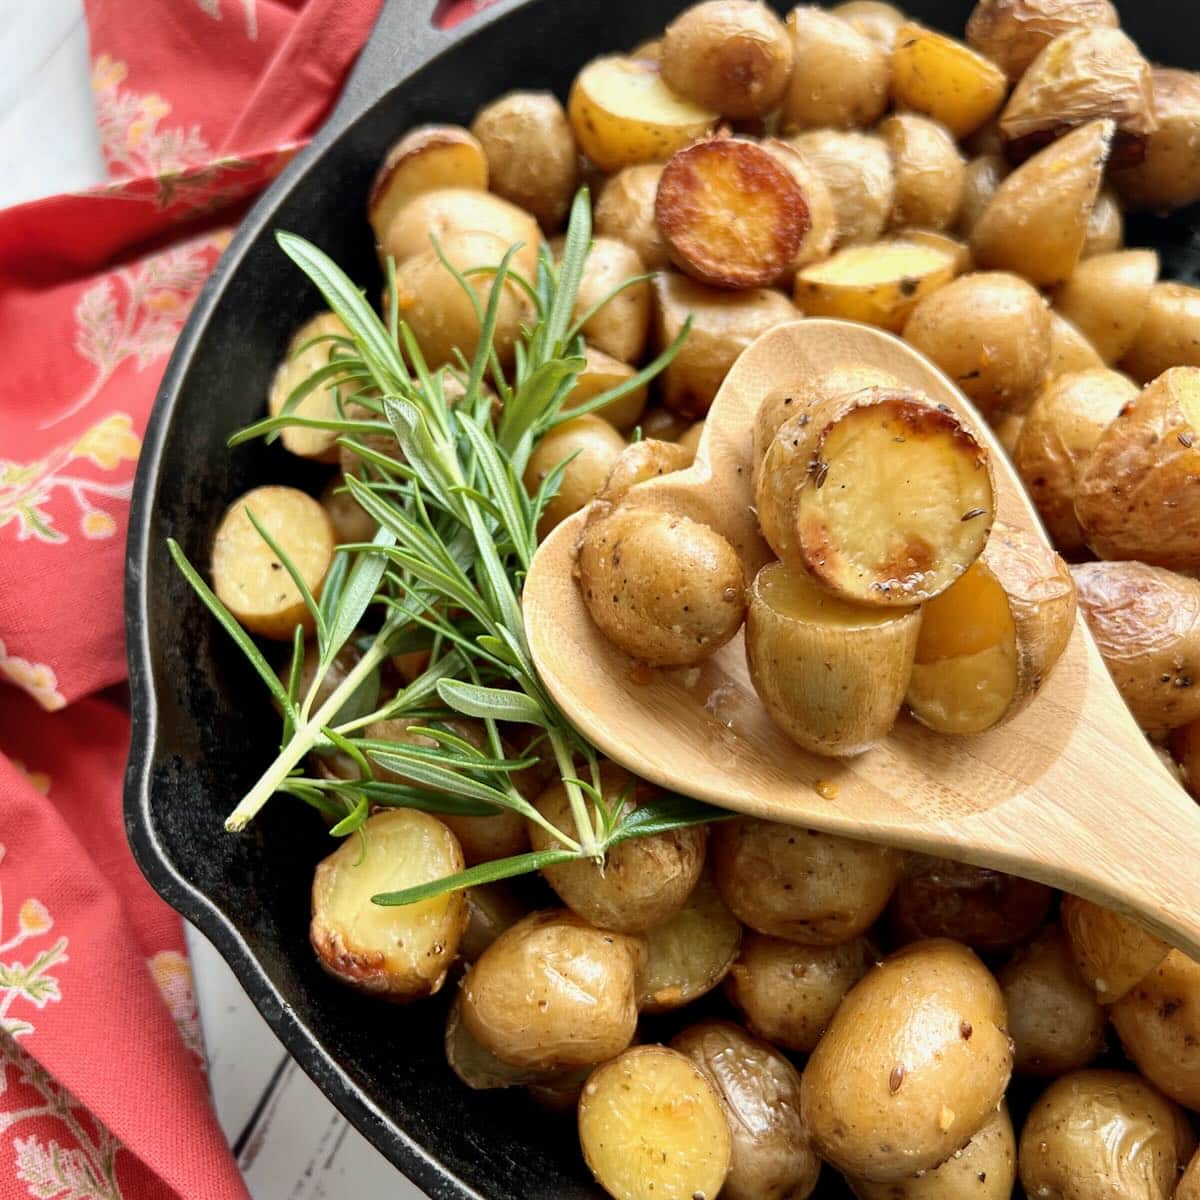 Roasted, halved new potatoes in a black pan garnished with fresh green rosemary sprigs.